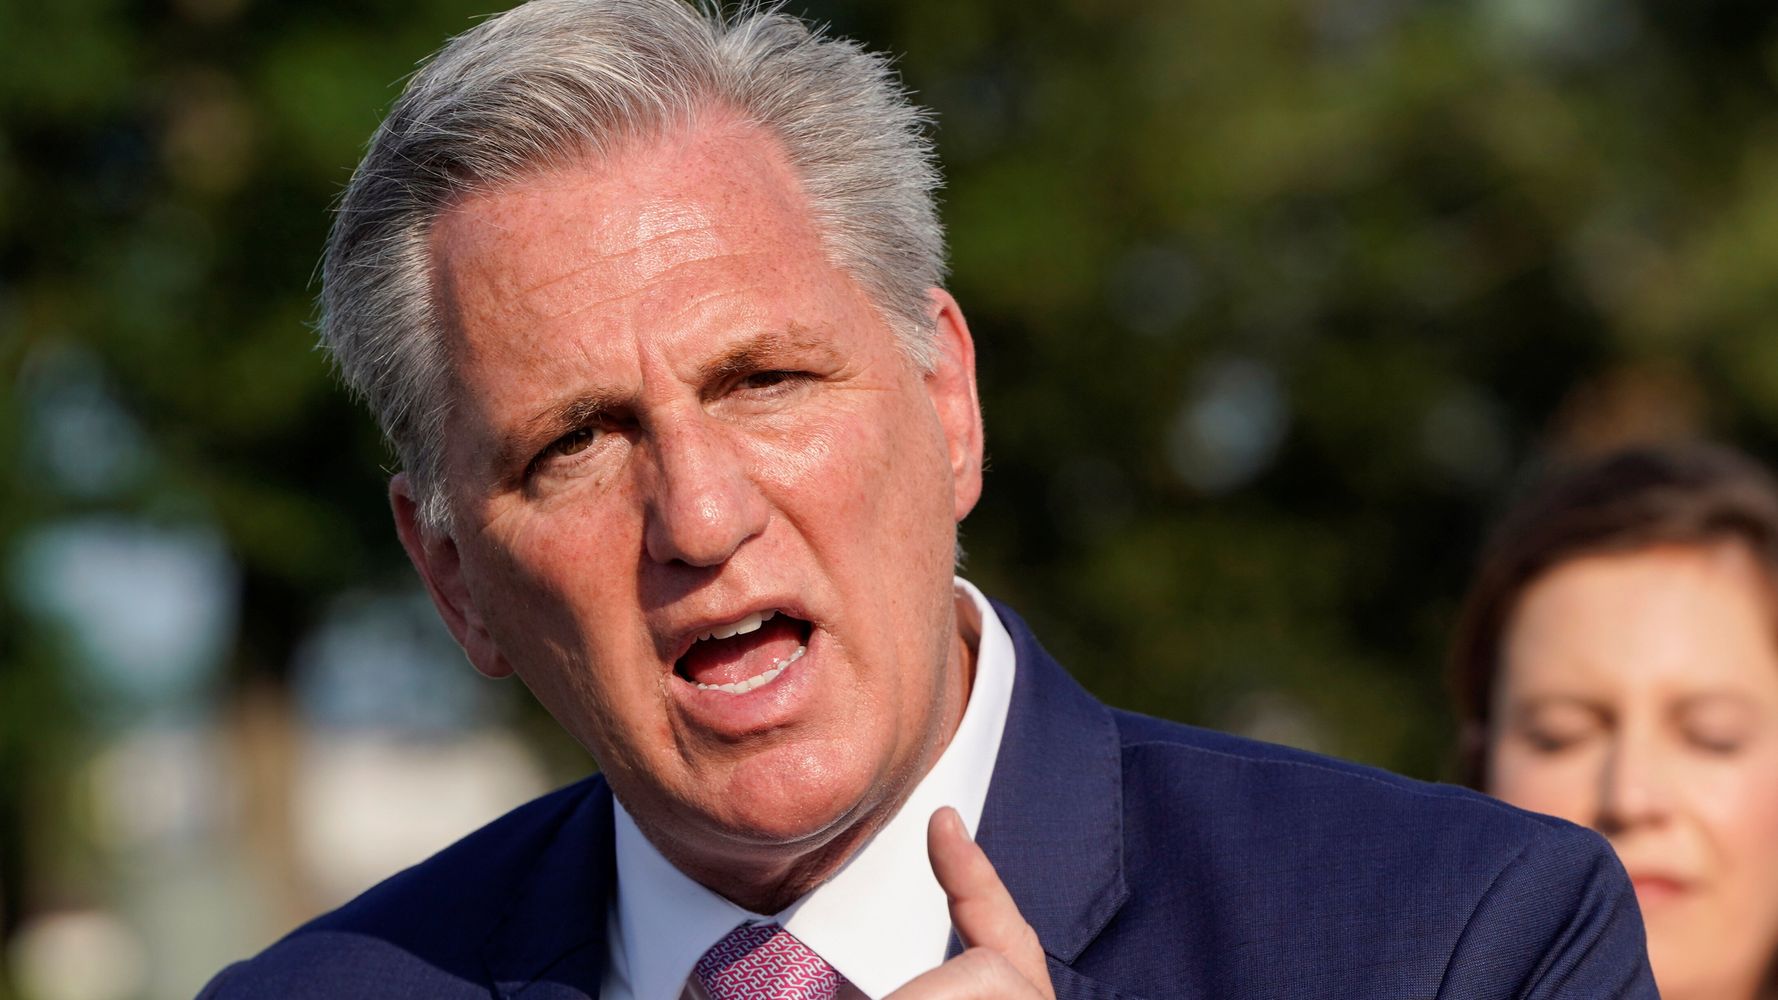 Kevin McCarthy Ripped On Twitter After Bizarre 3-Word All-Caps Vaccine Rant